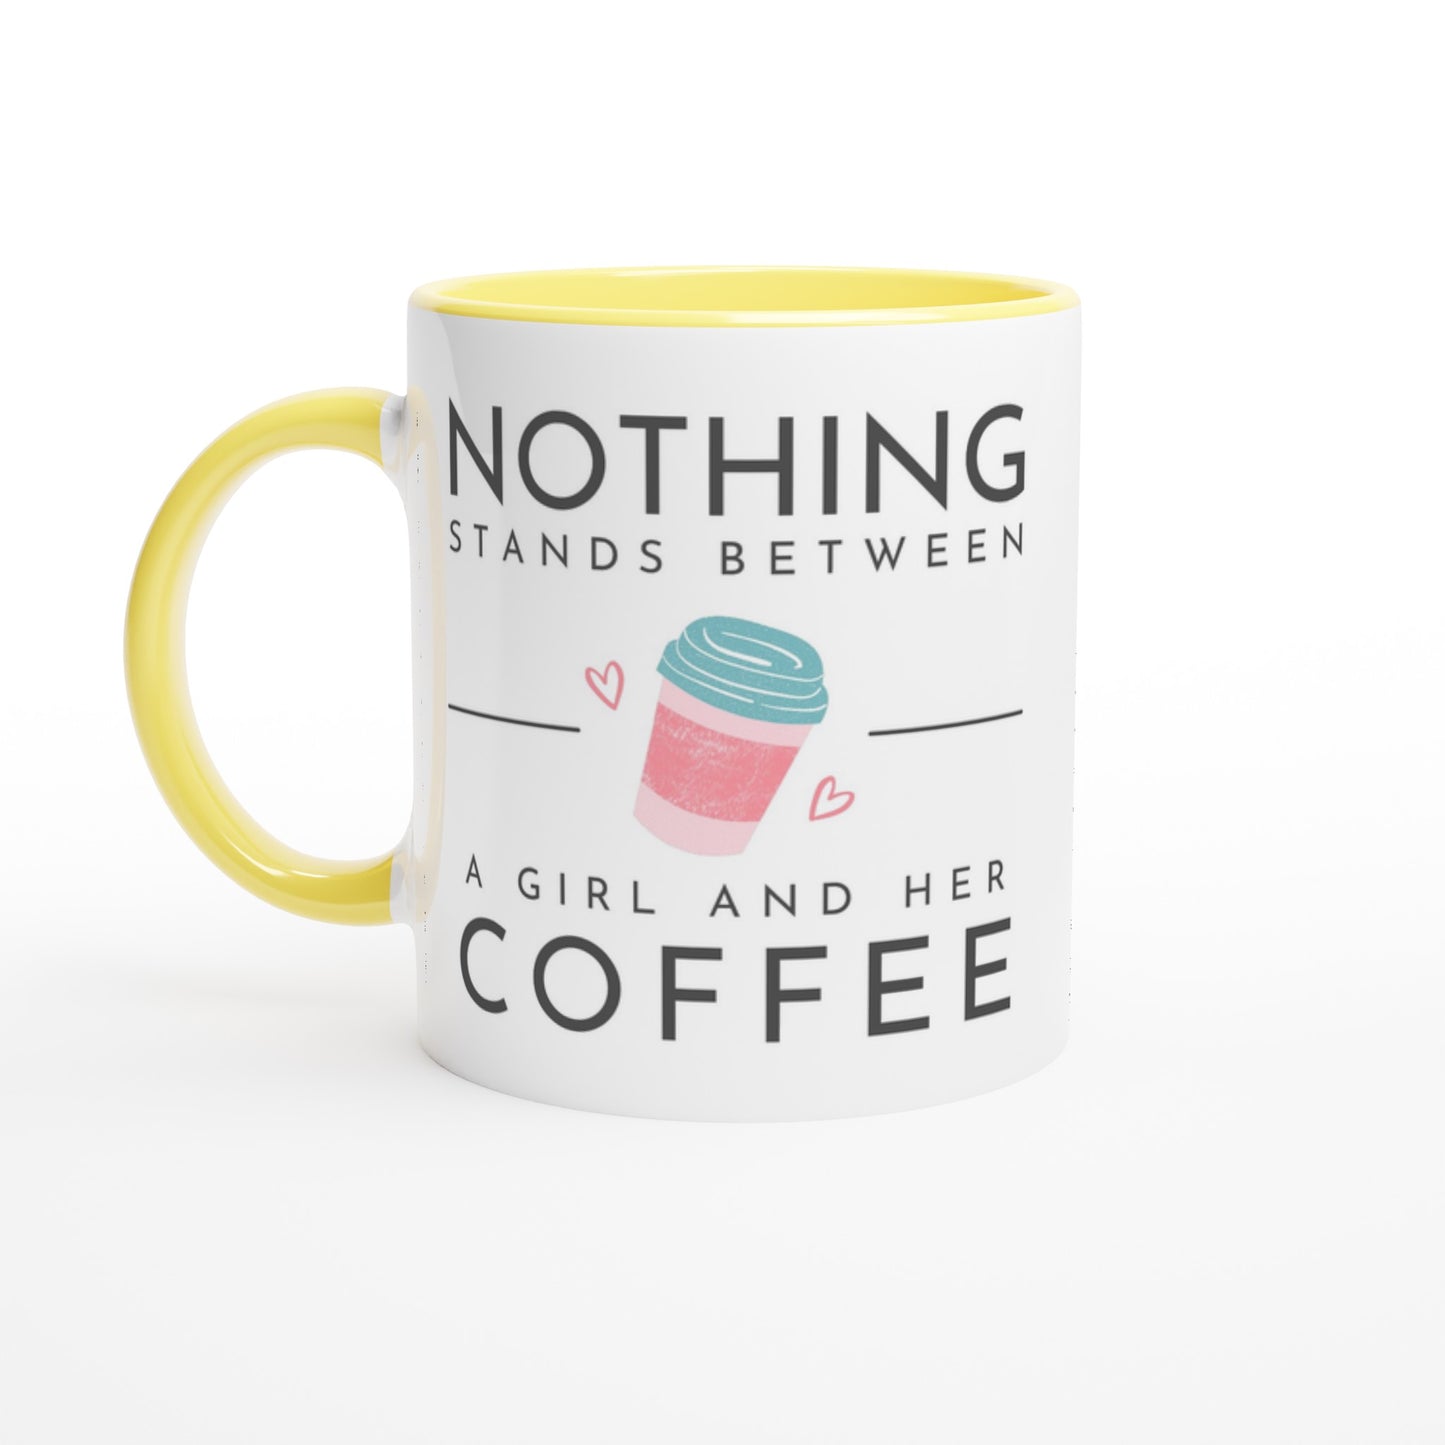 Nothing Stands Between A Girl And Her Coffee - White 11oz Ceramic Mug with Colour Inside Ceramic Yellow Colour 11oz Mug Coffee